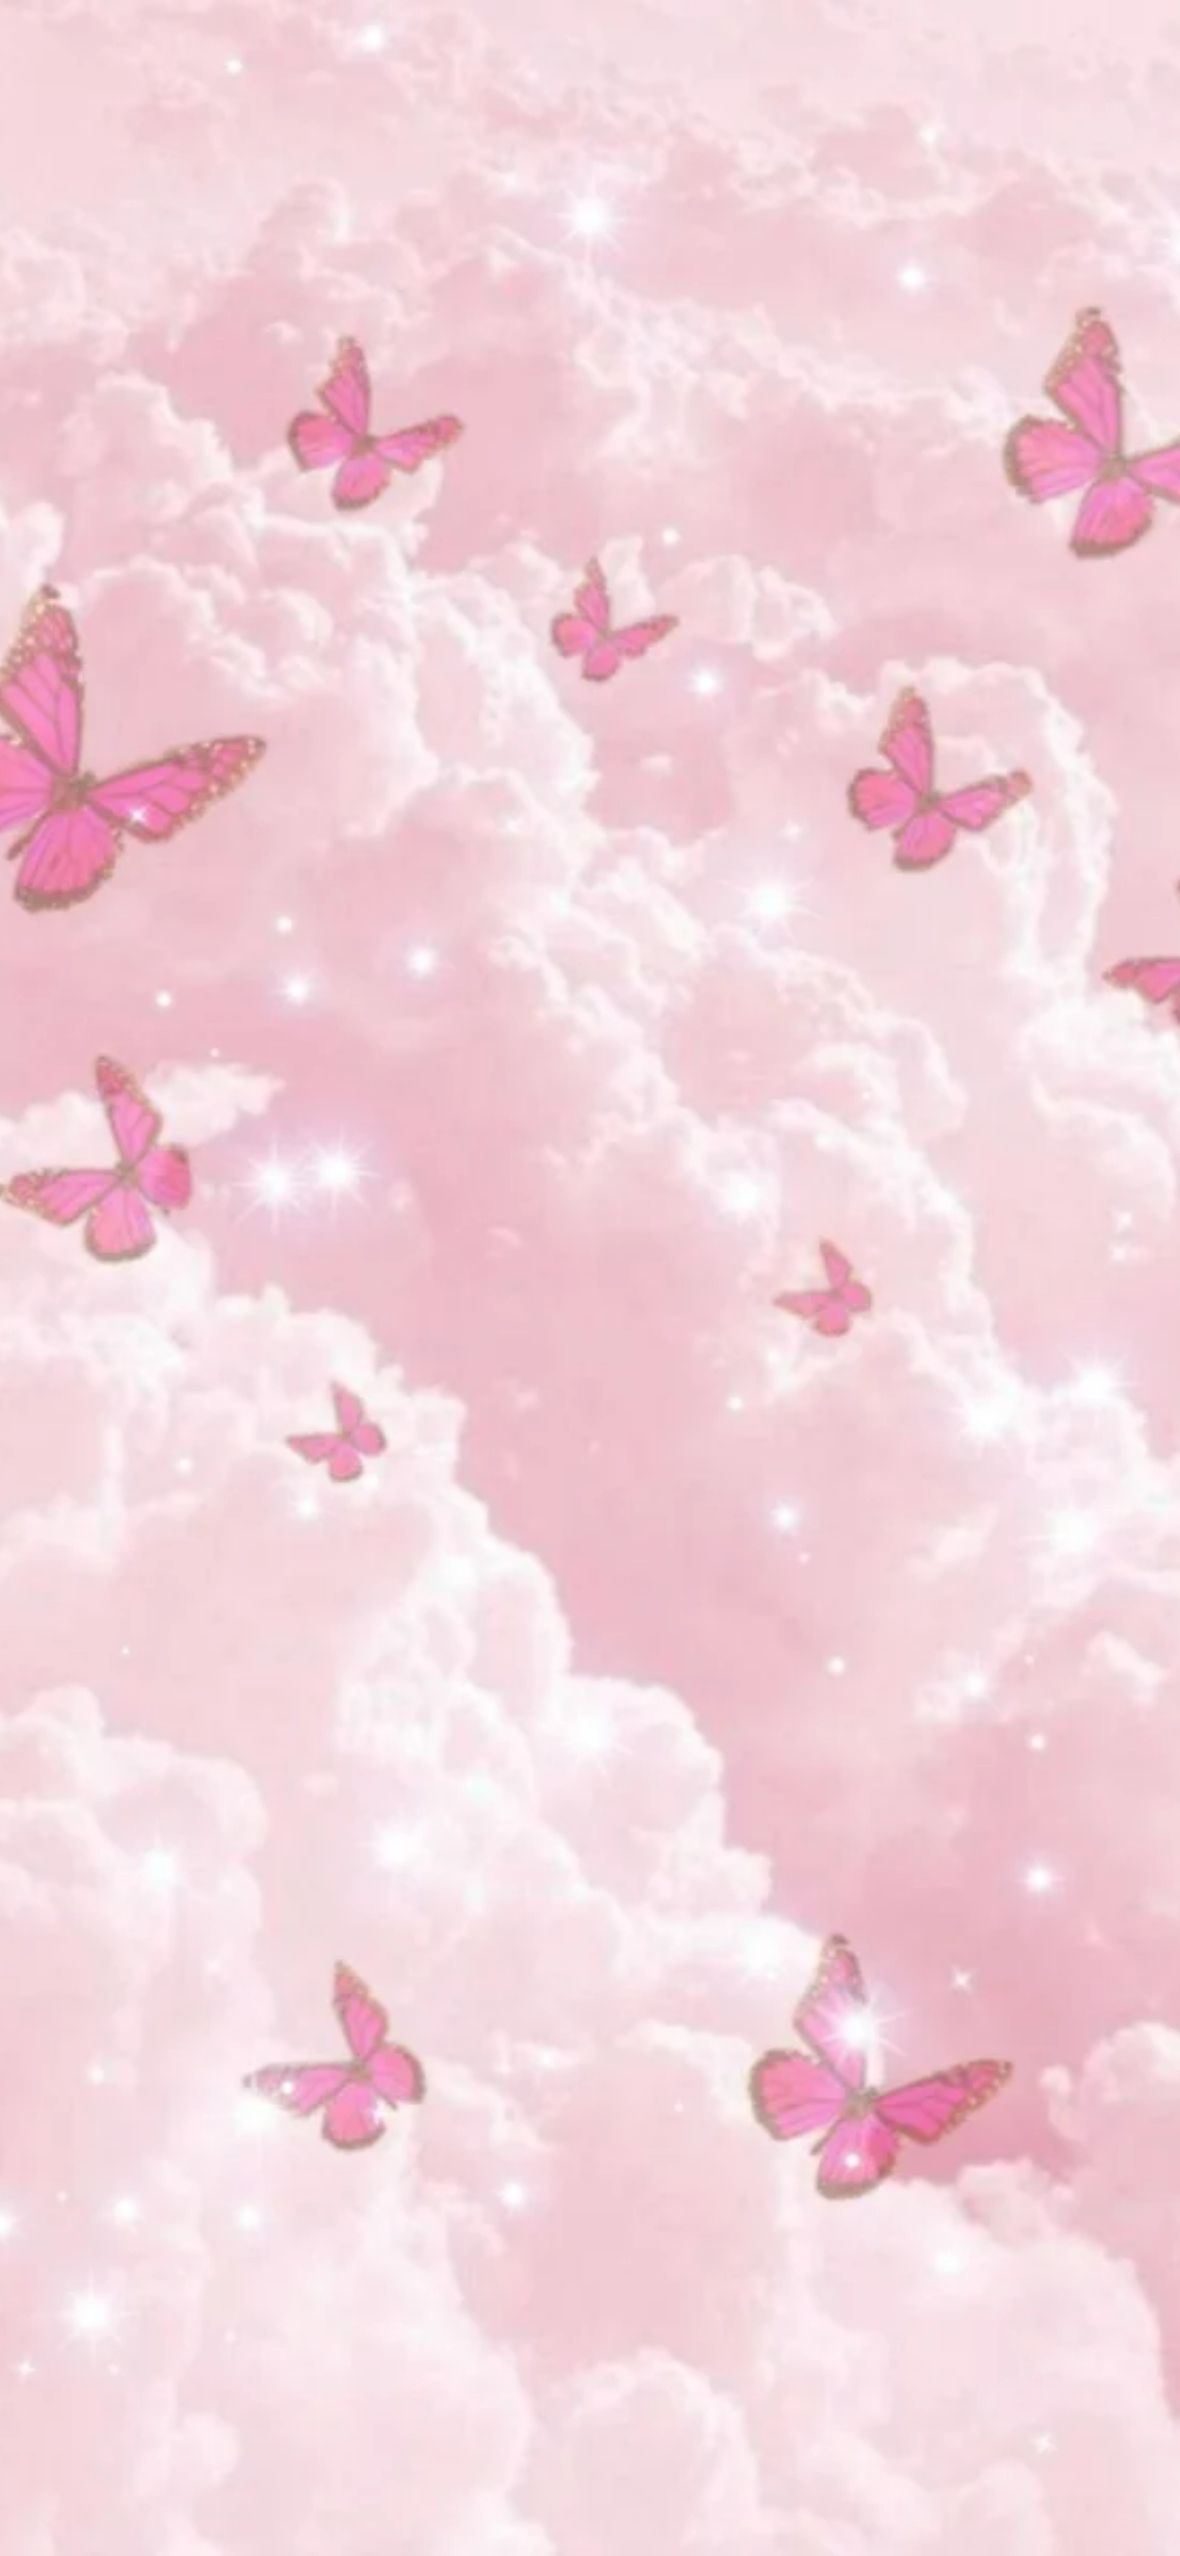 Aesthetic pink butterfly wallpaper for phone - Light pink